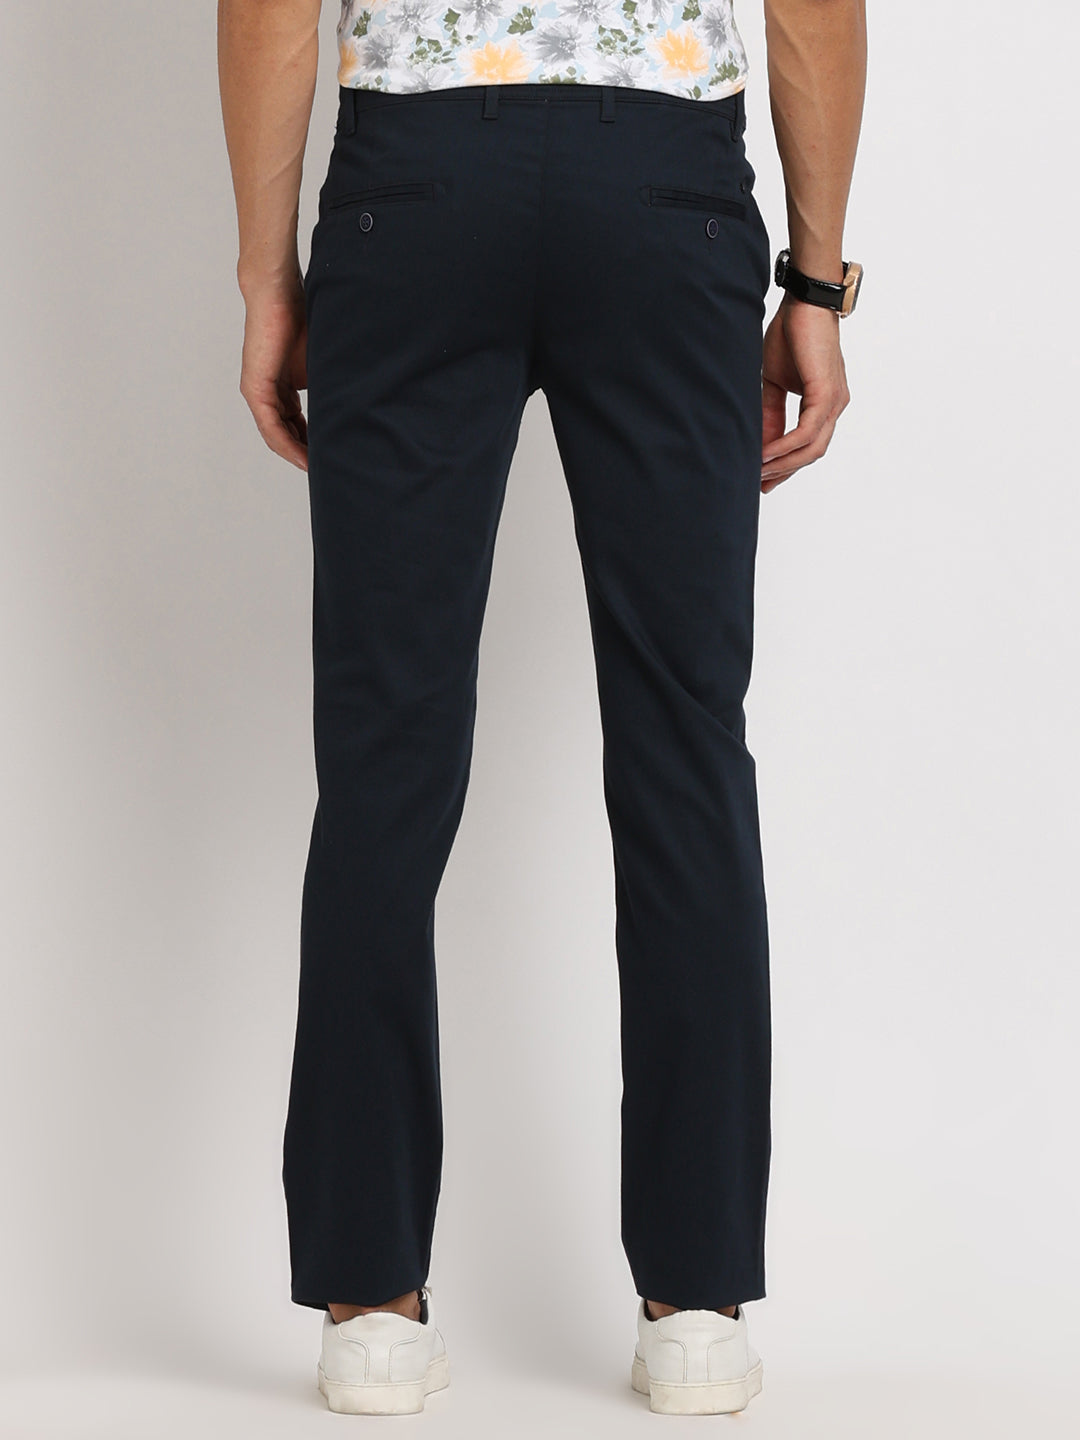 Cotton Stretch Navy Blue Plain Ultra Slim Fit Flat Front Casual Trouser